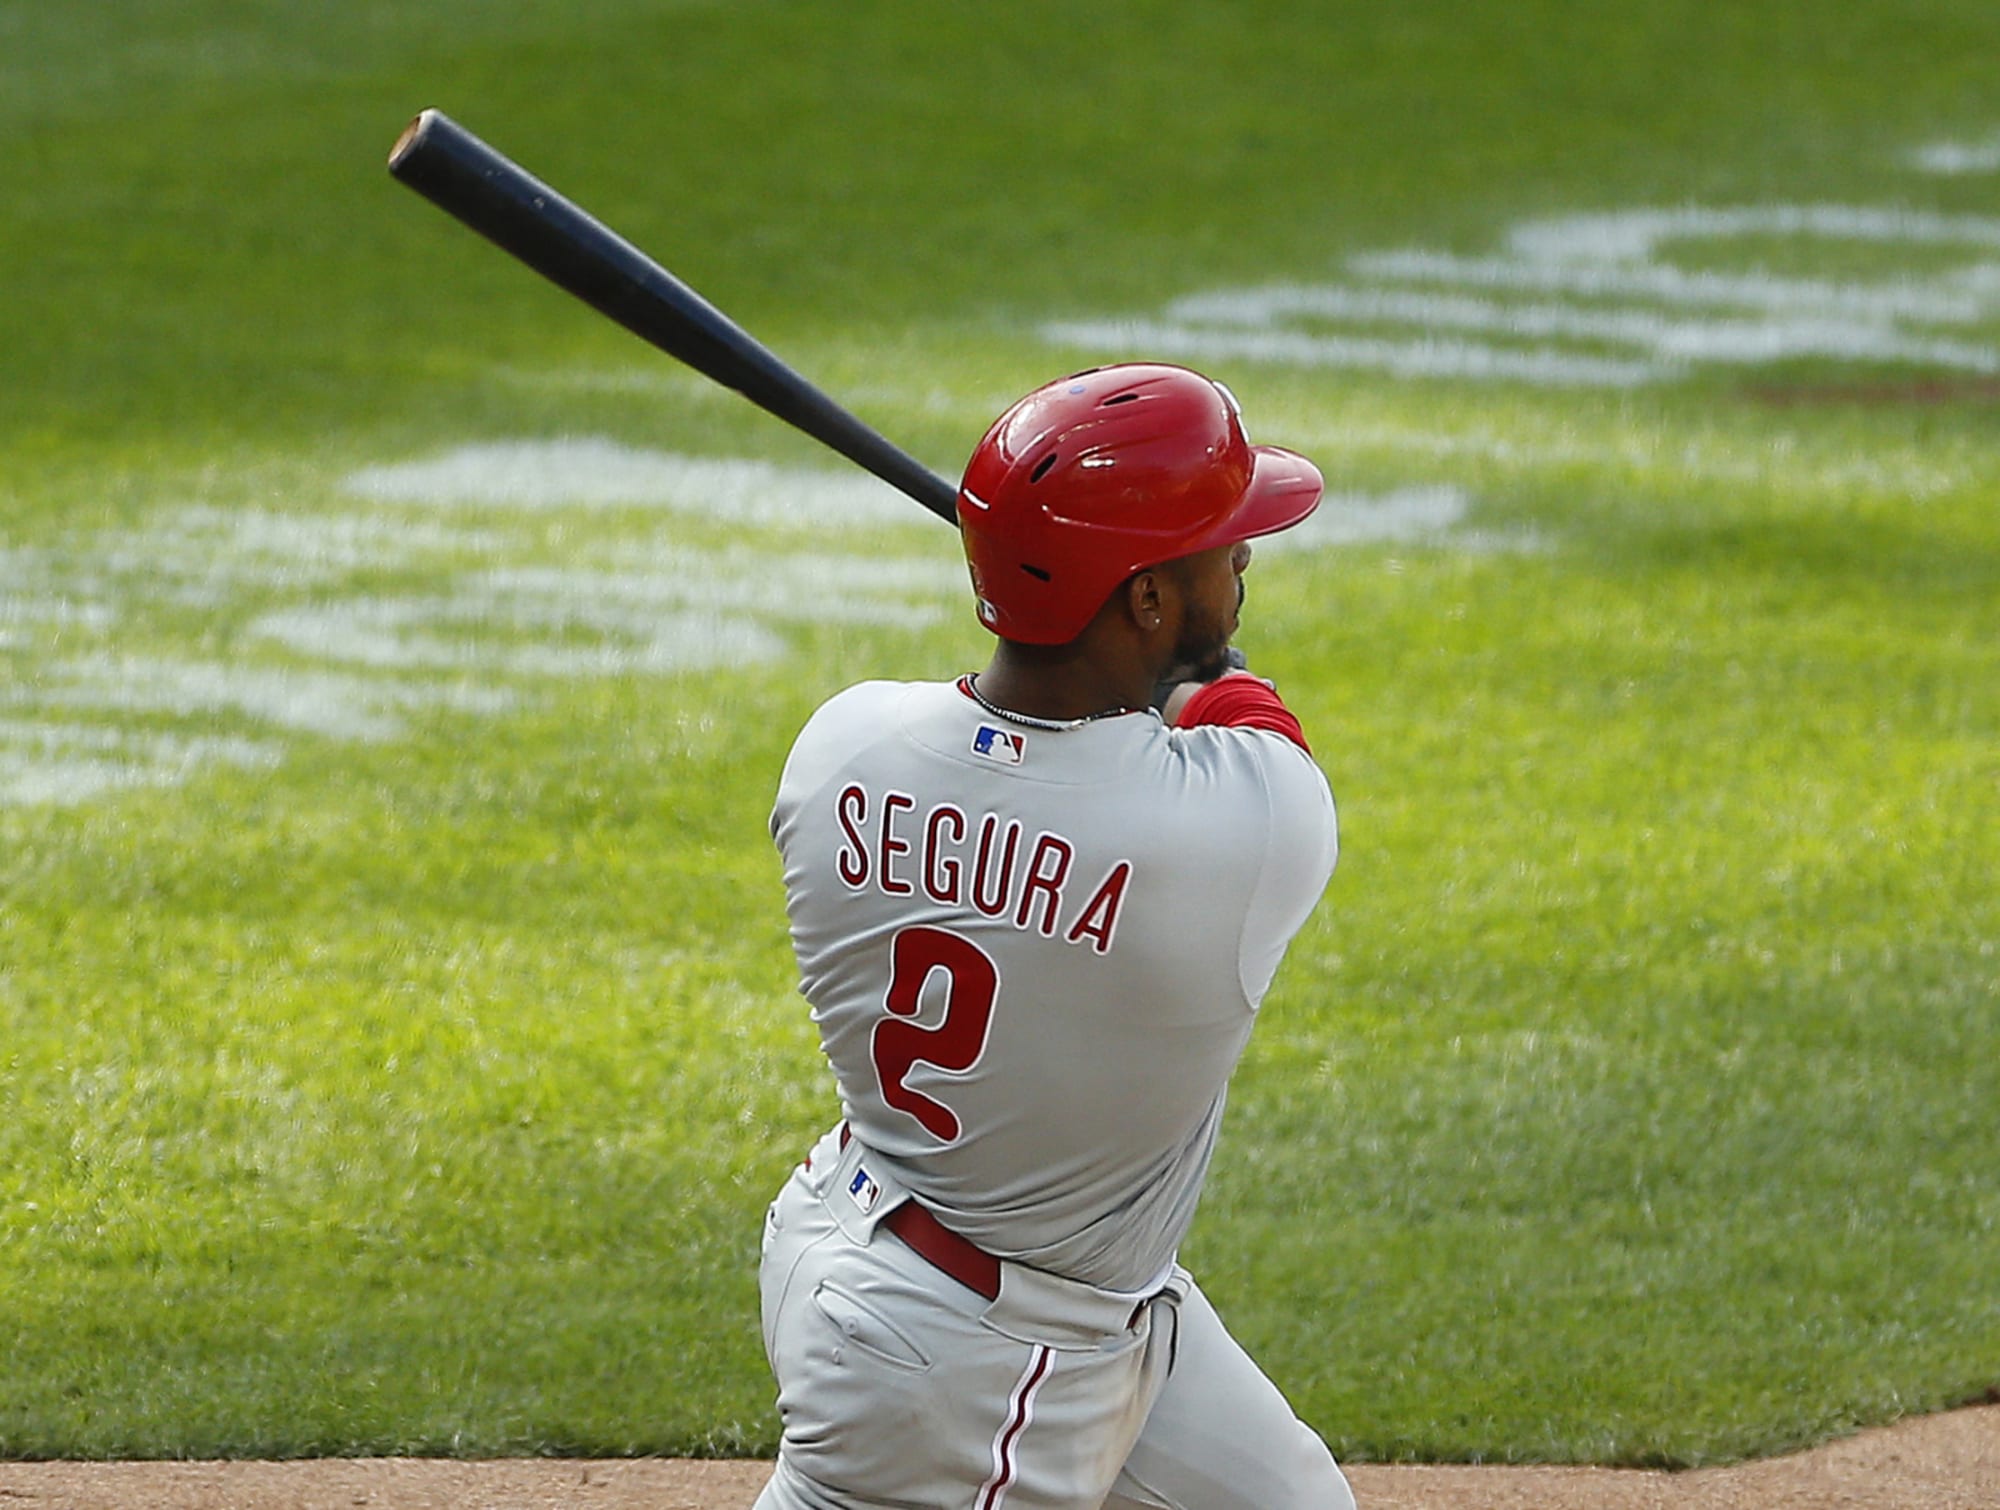 The Philadelphia Phillies could really use a bounceback year from Segura